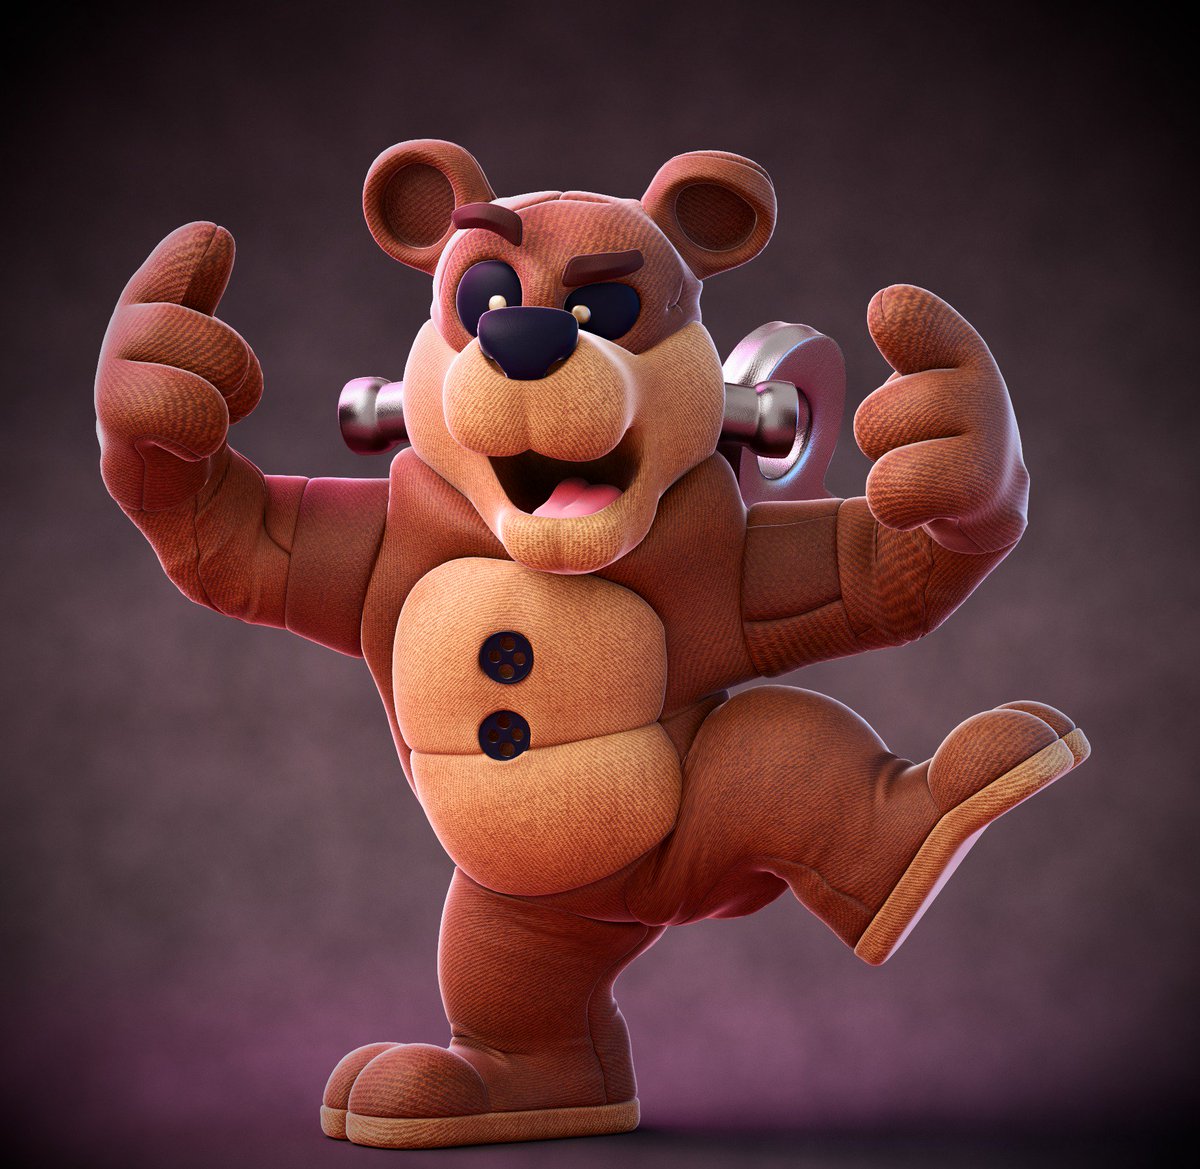 i remade Bubba from fnaf world from scratch : r/fivenightsatfreddys